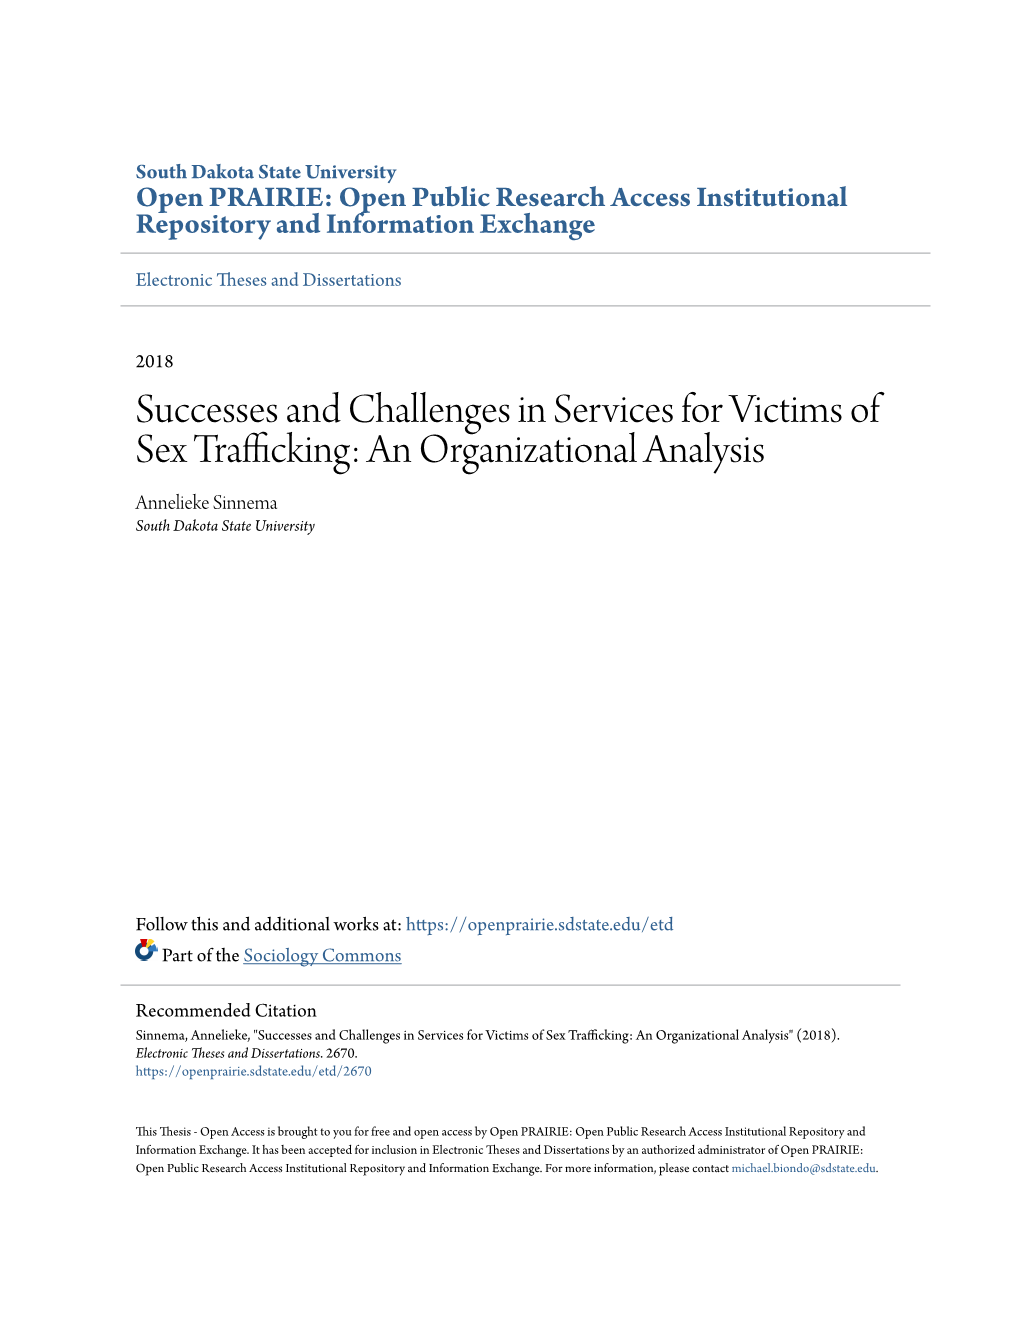 Successes and Challenges in Services for Victims of Sex Trafficking: an Organizational Analysis Annelieke Sinnema South Dakota State University